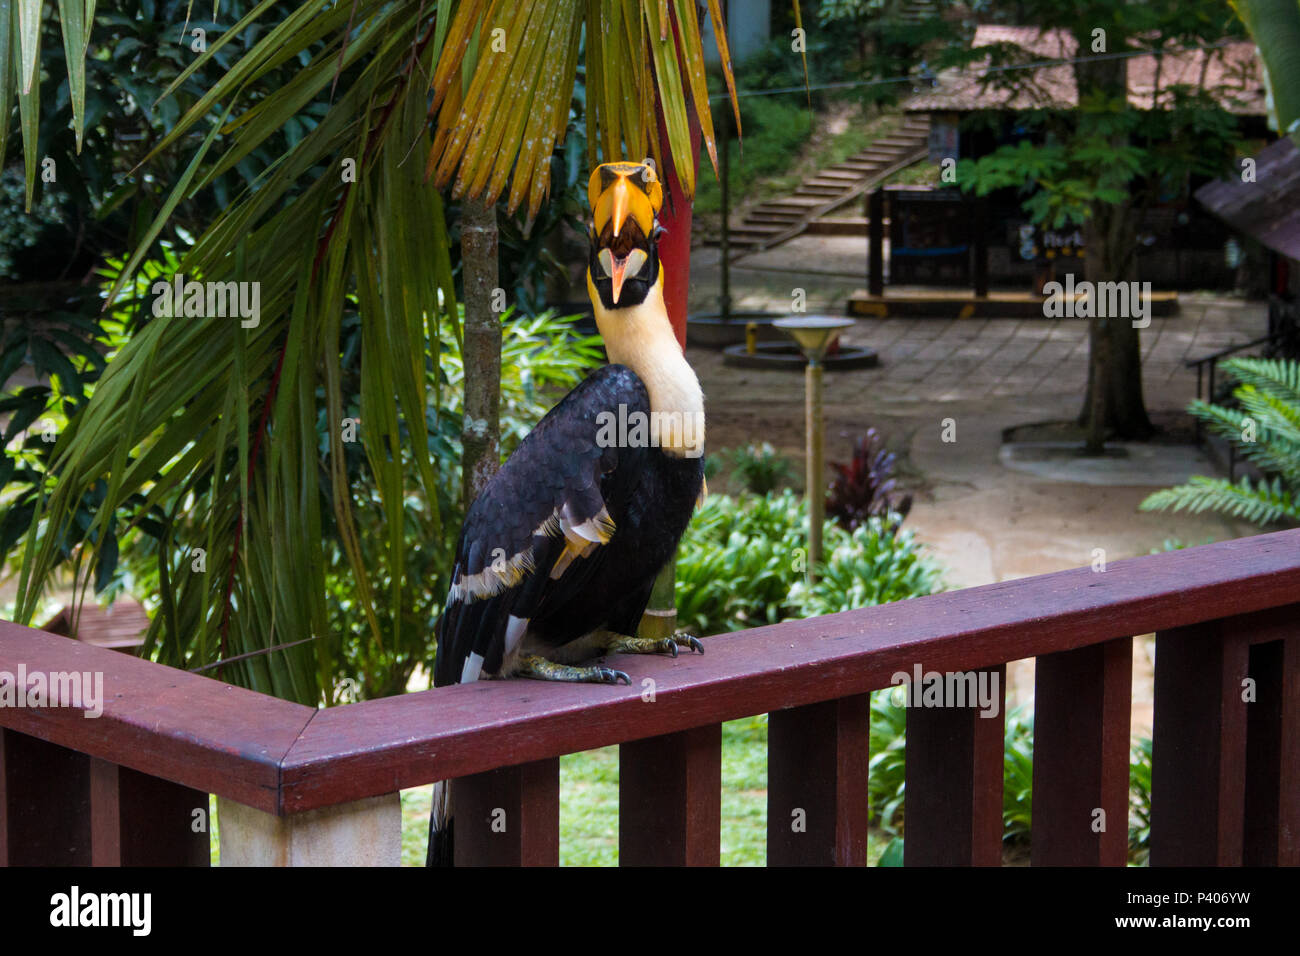 This unbashful male great hornbill (Buceros bicornis) on a wooden handrail is looking into the camera with its bill wide open and making lots of noise. Stock Photo